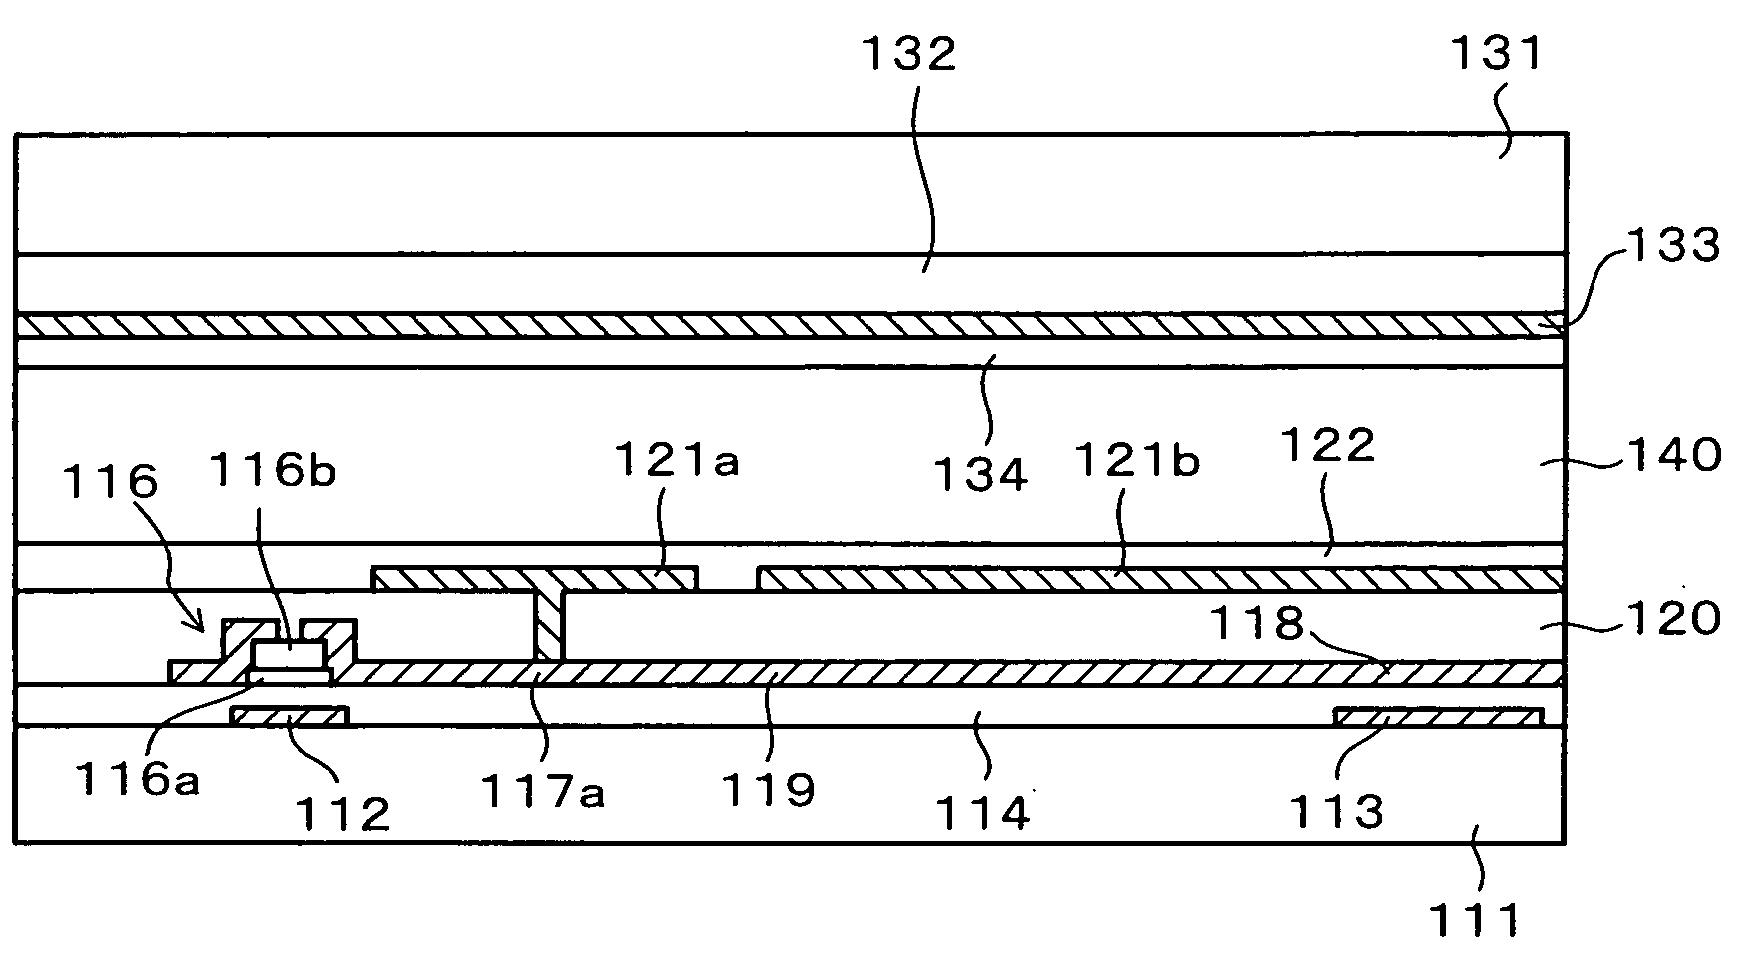 Liquid crystal display device and method of preventing image sticking thereon